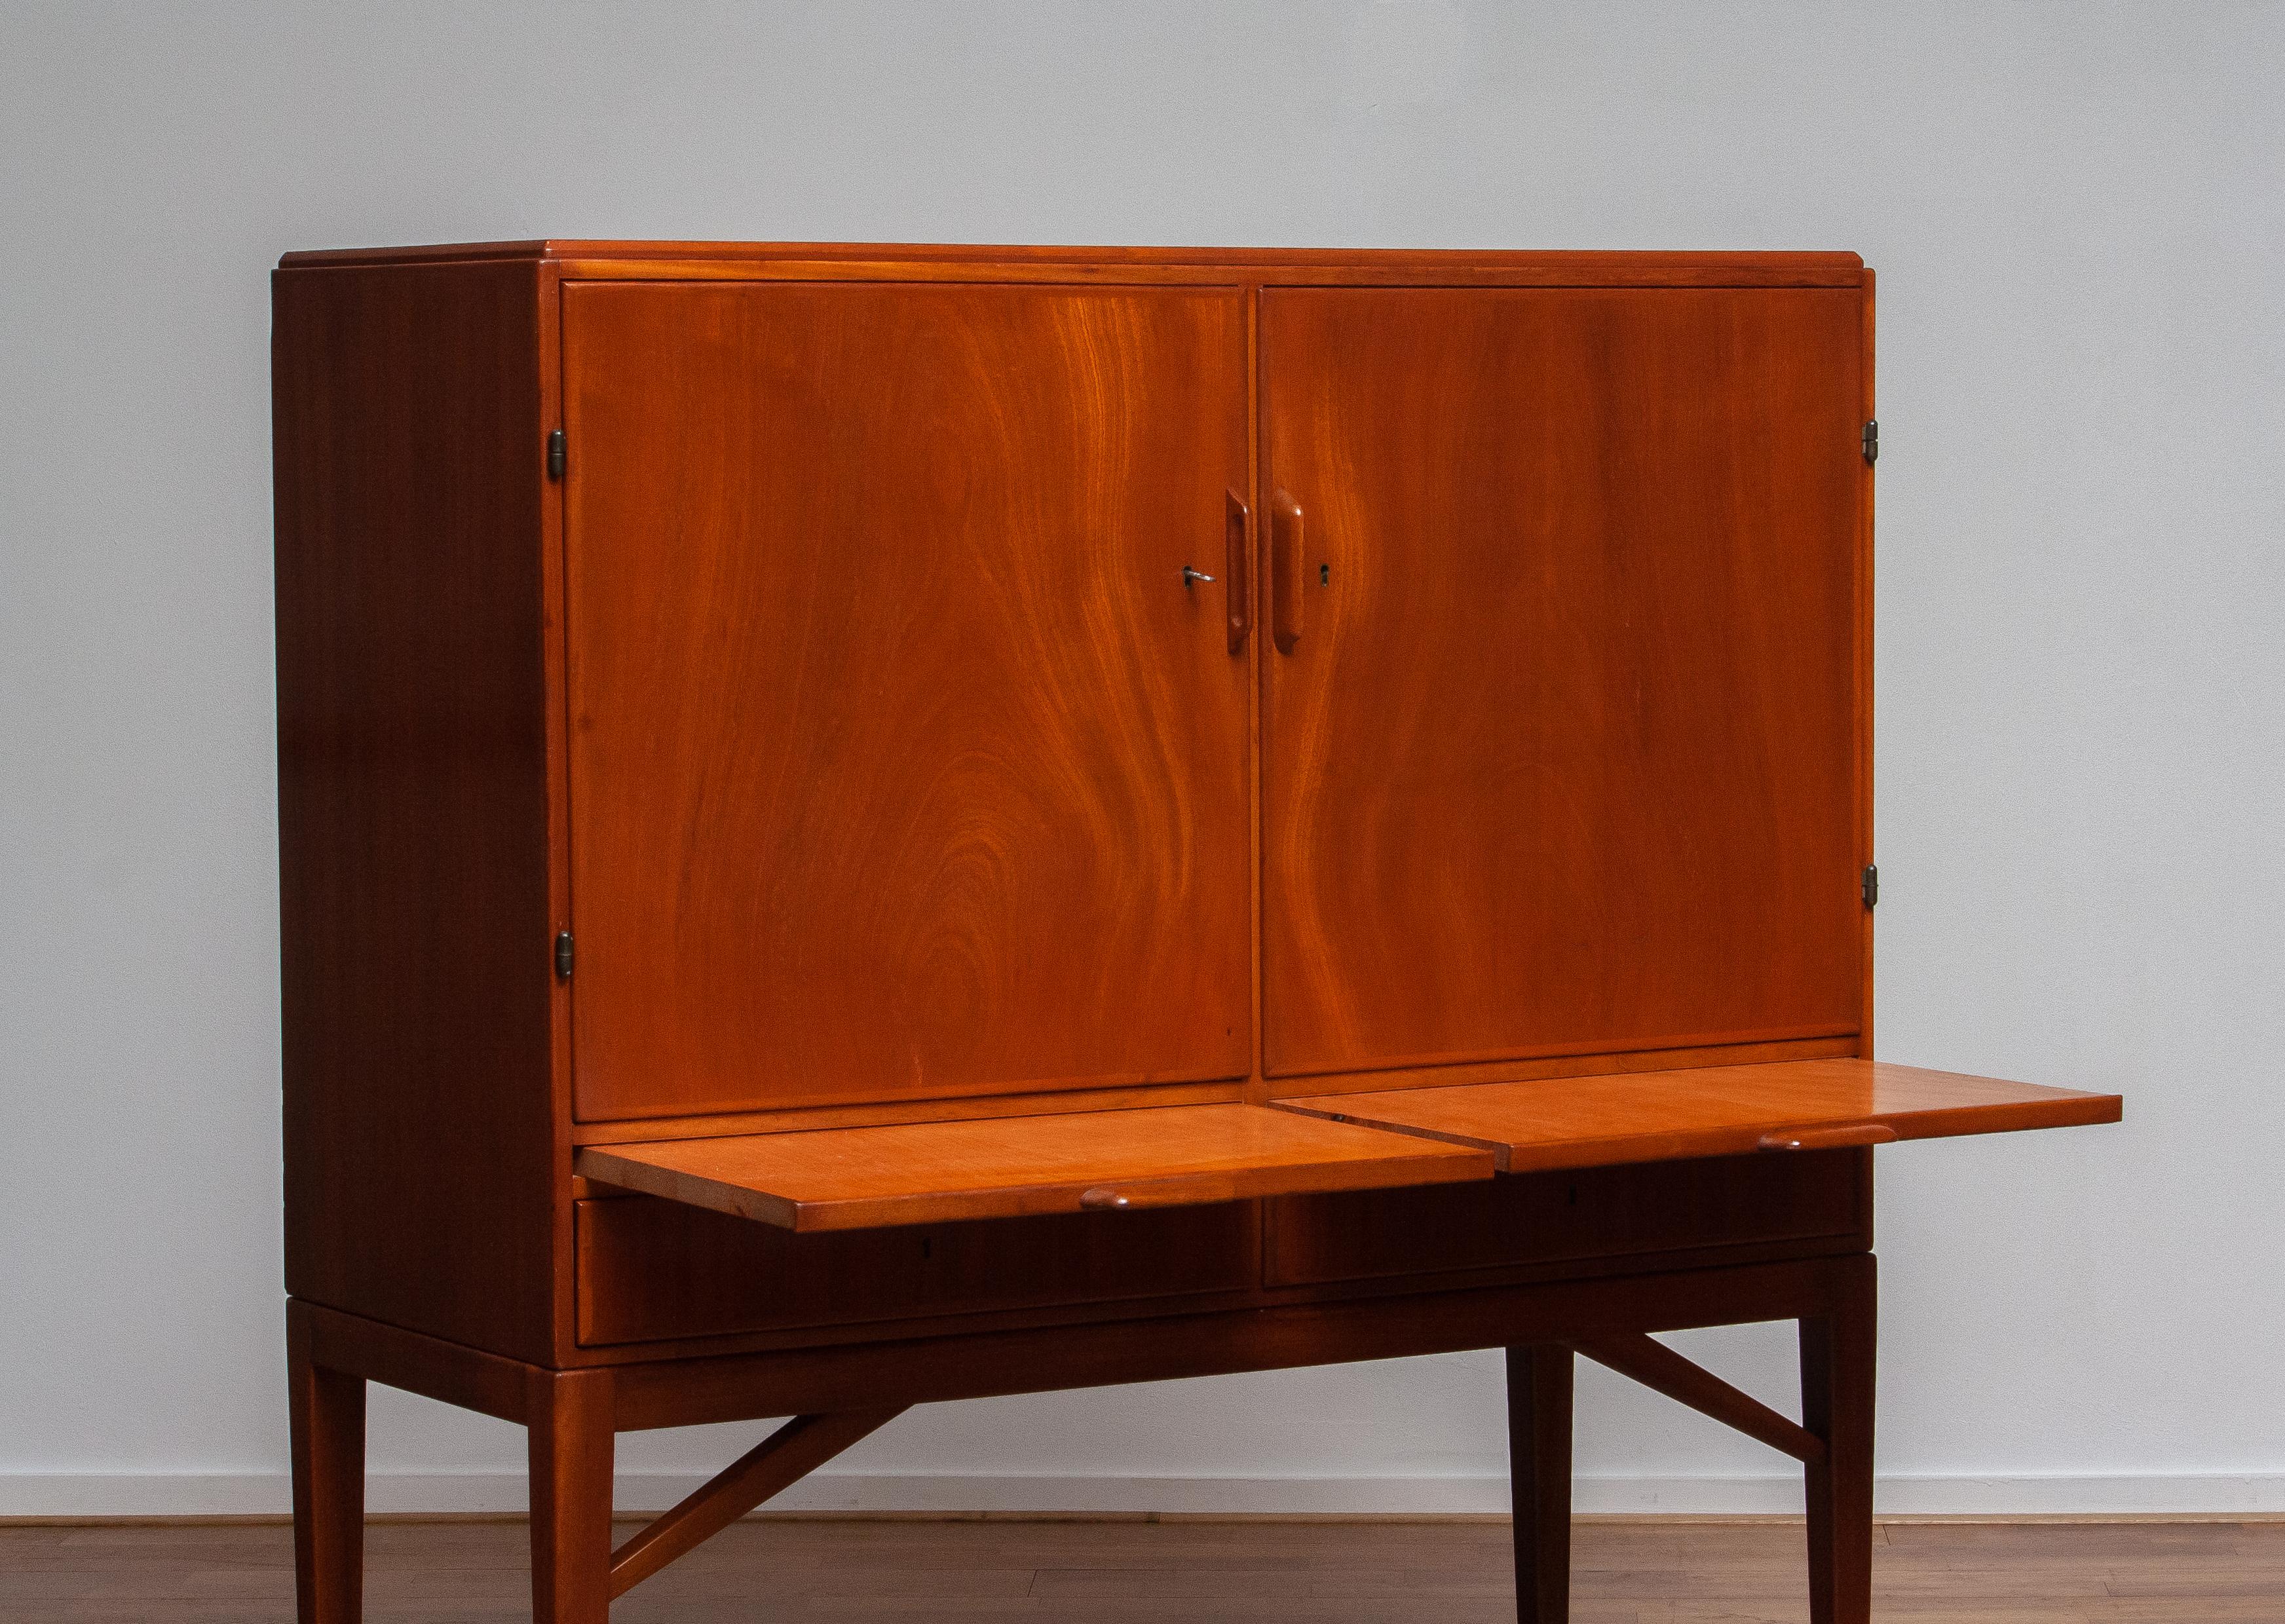 1950s, High Quality Mahogany Dry Bar / Cabinet Made by Marbo Sweden, SMI Labeled 5